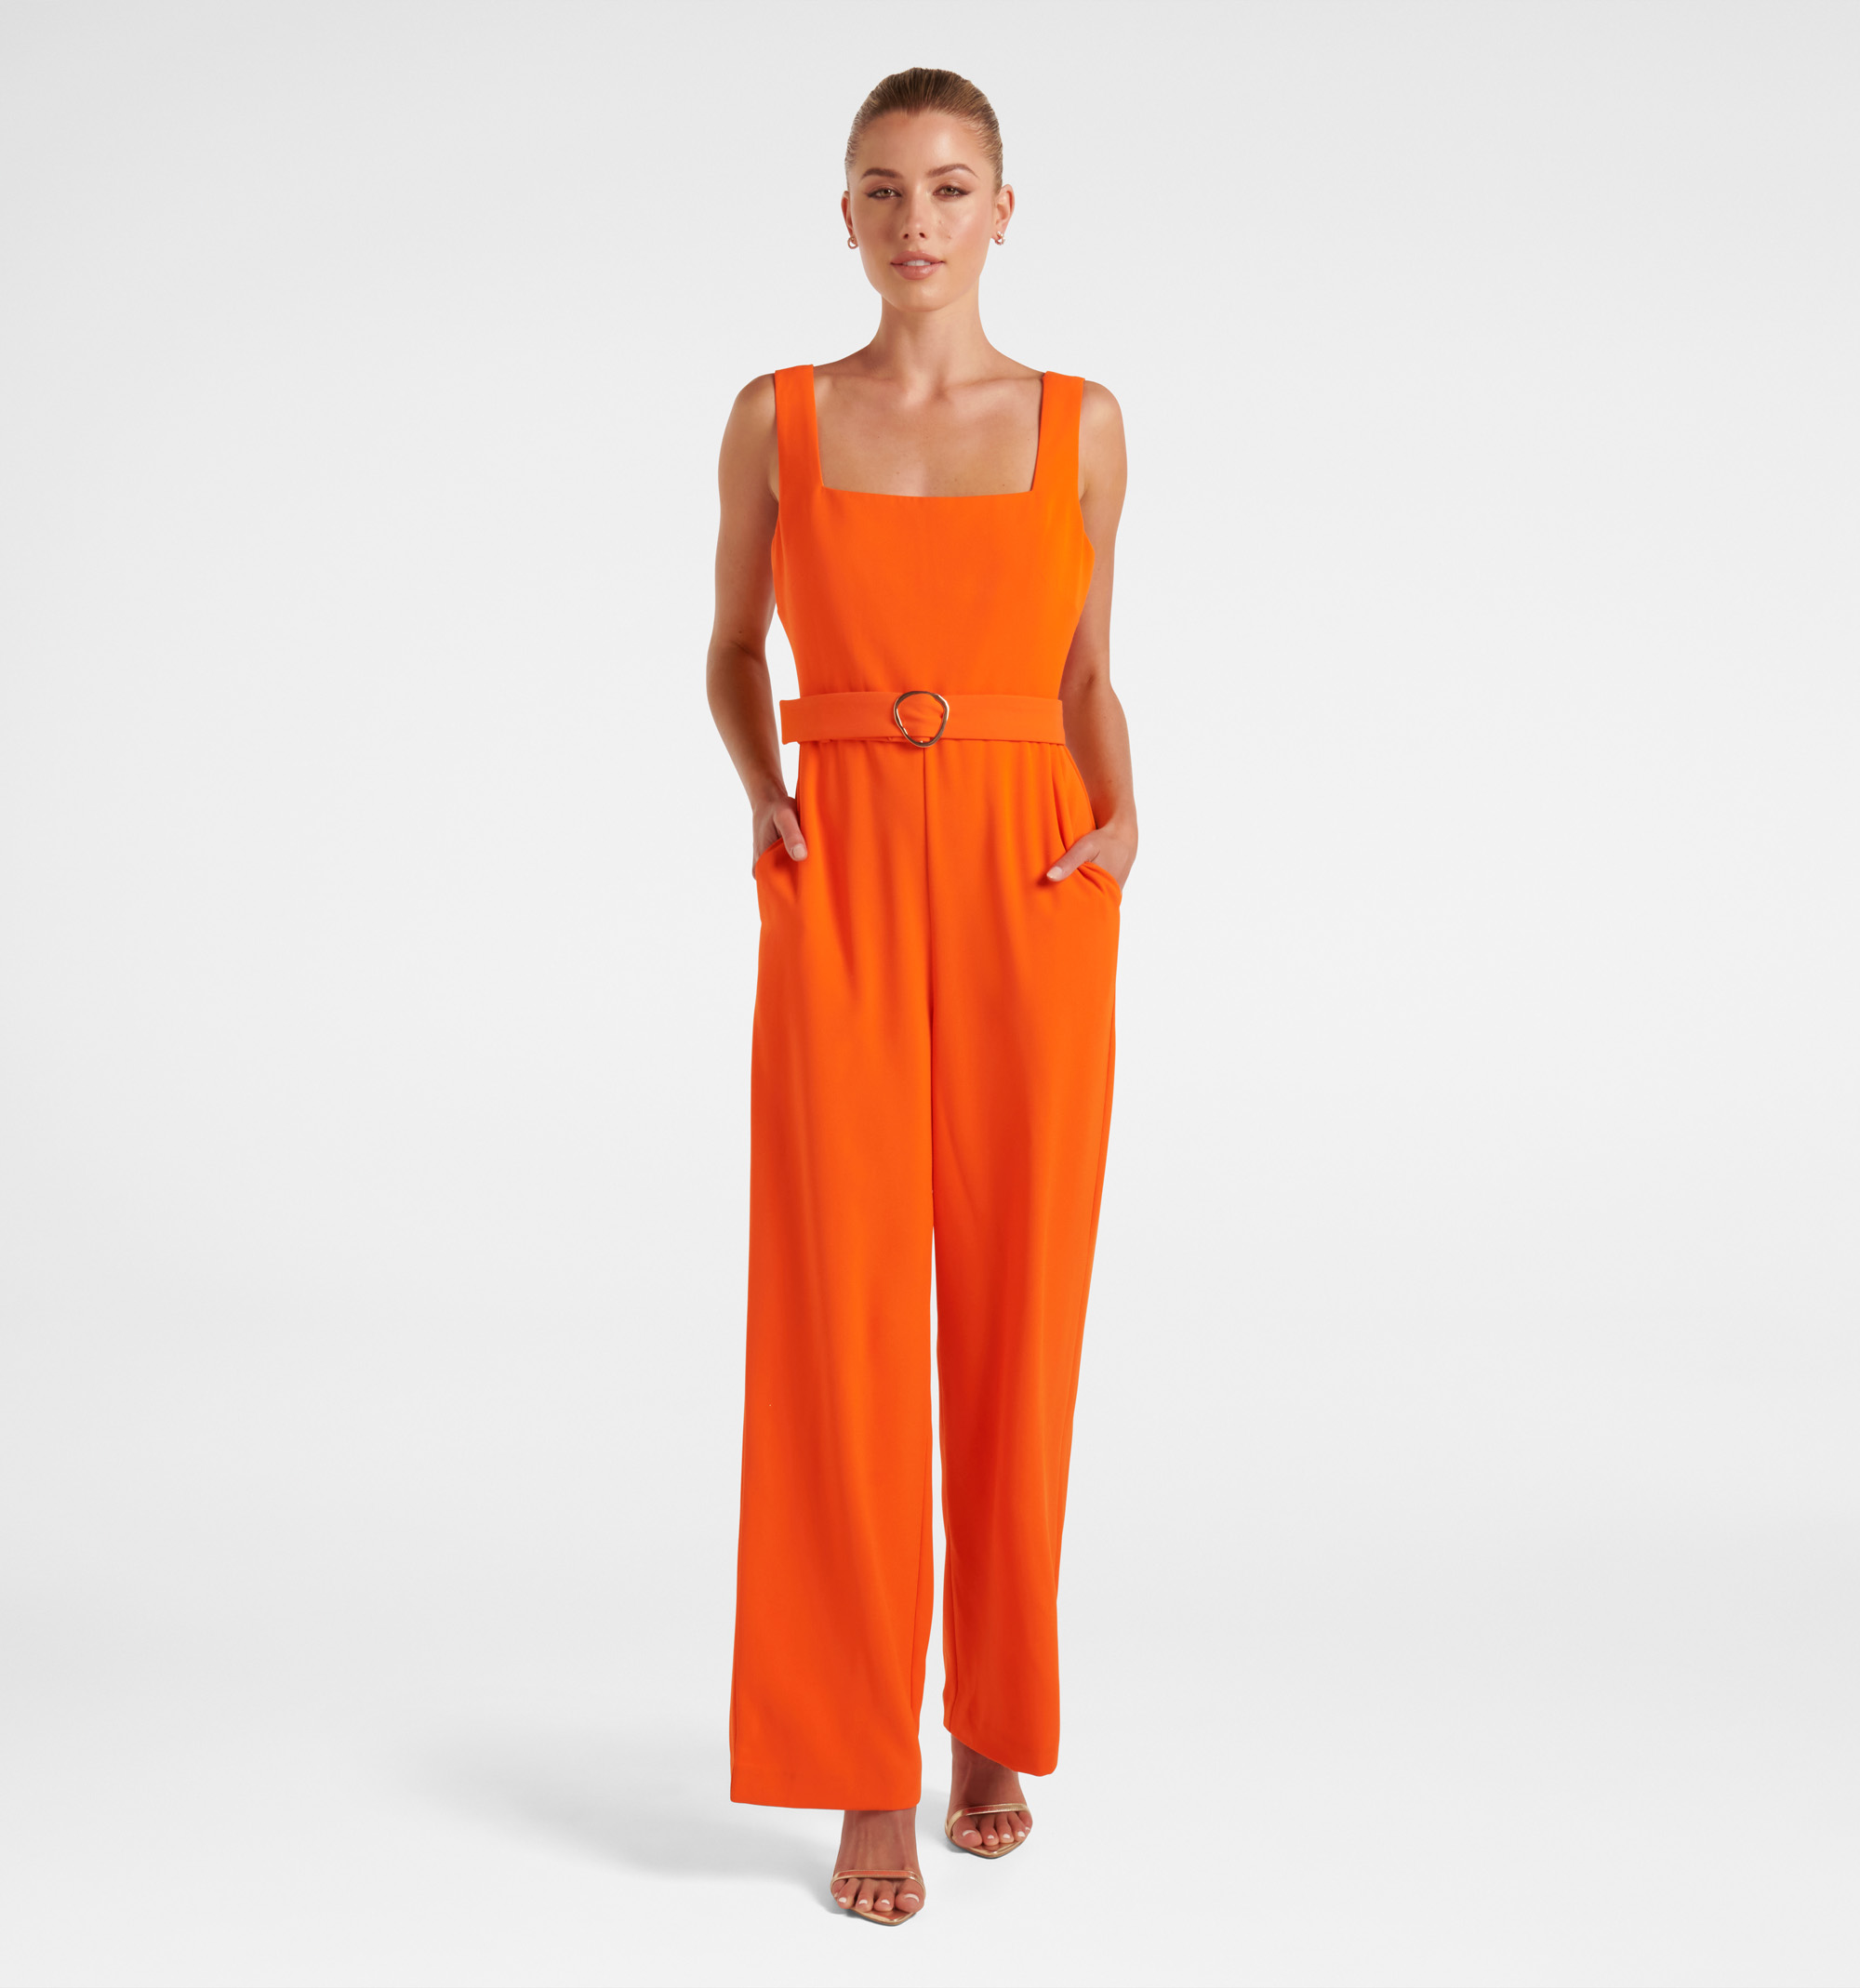 Shop Forever New Jumpsuits for Women up to 80% Off | DealDoodle